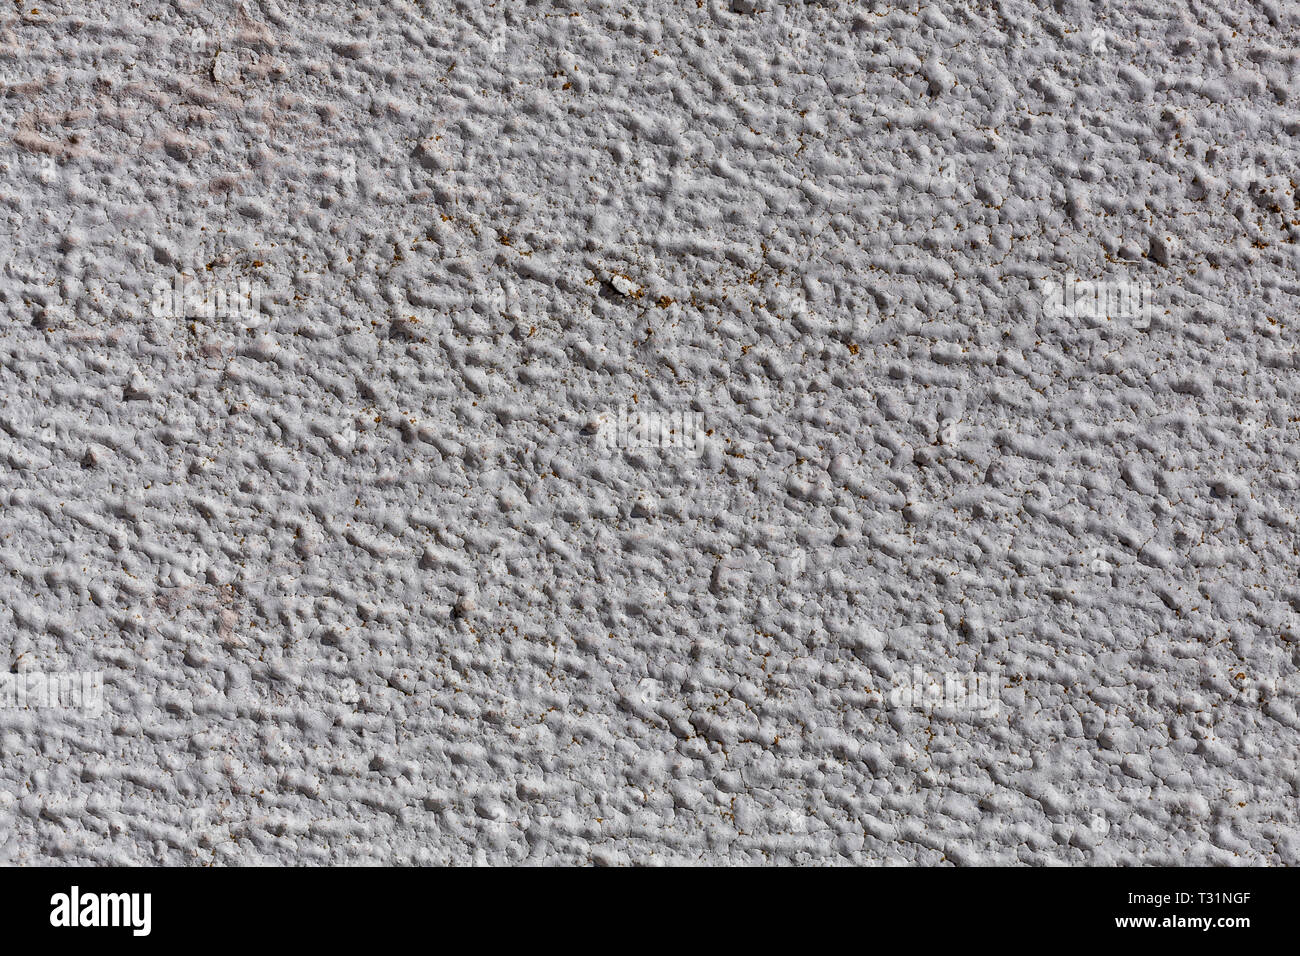 Rugged ink texture of a cement wall. Stock Photo